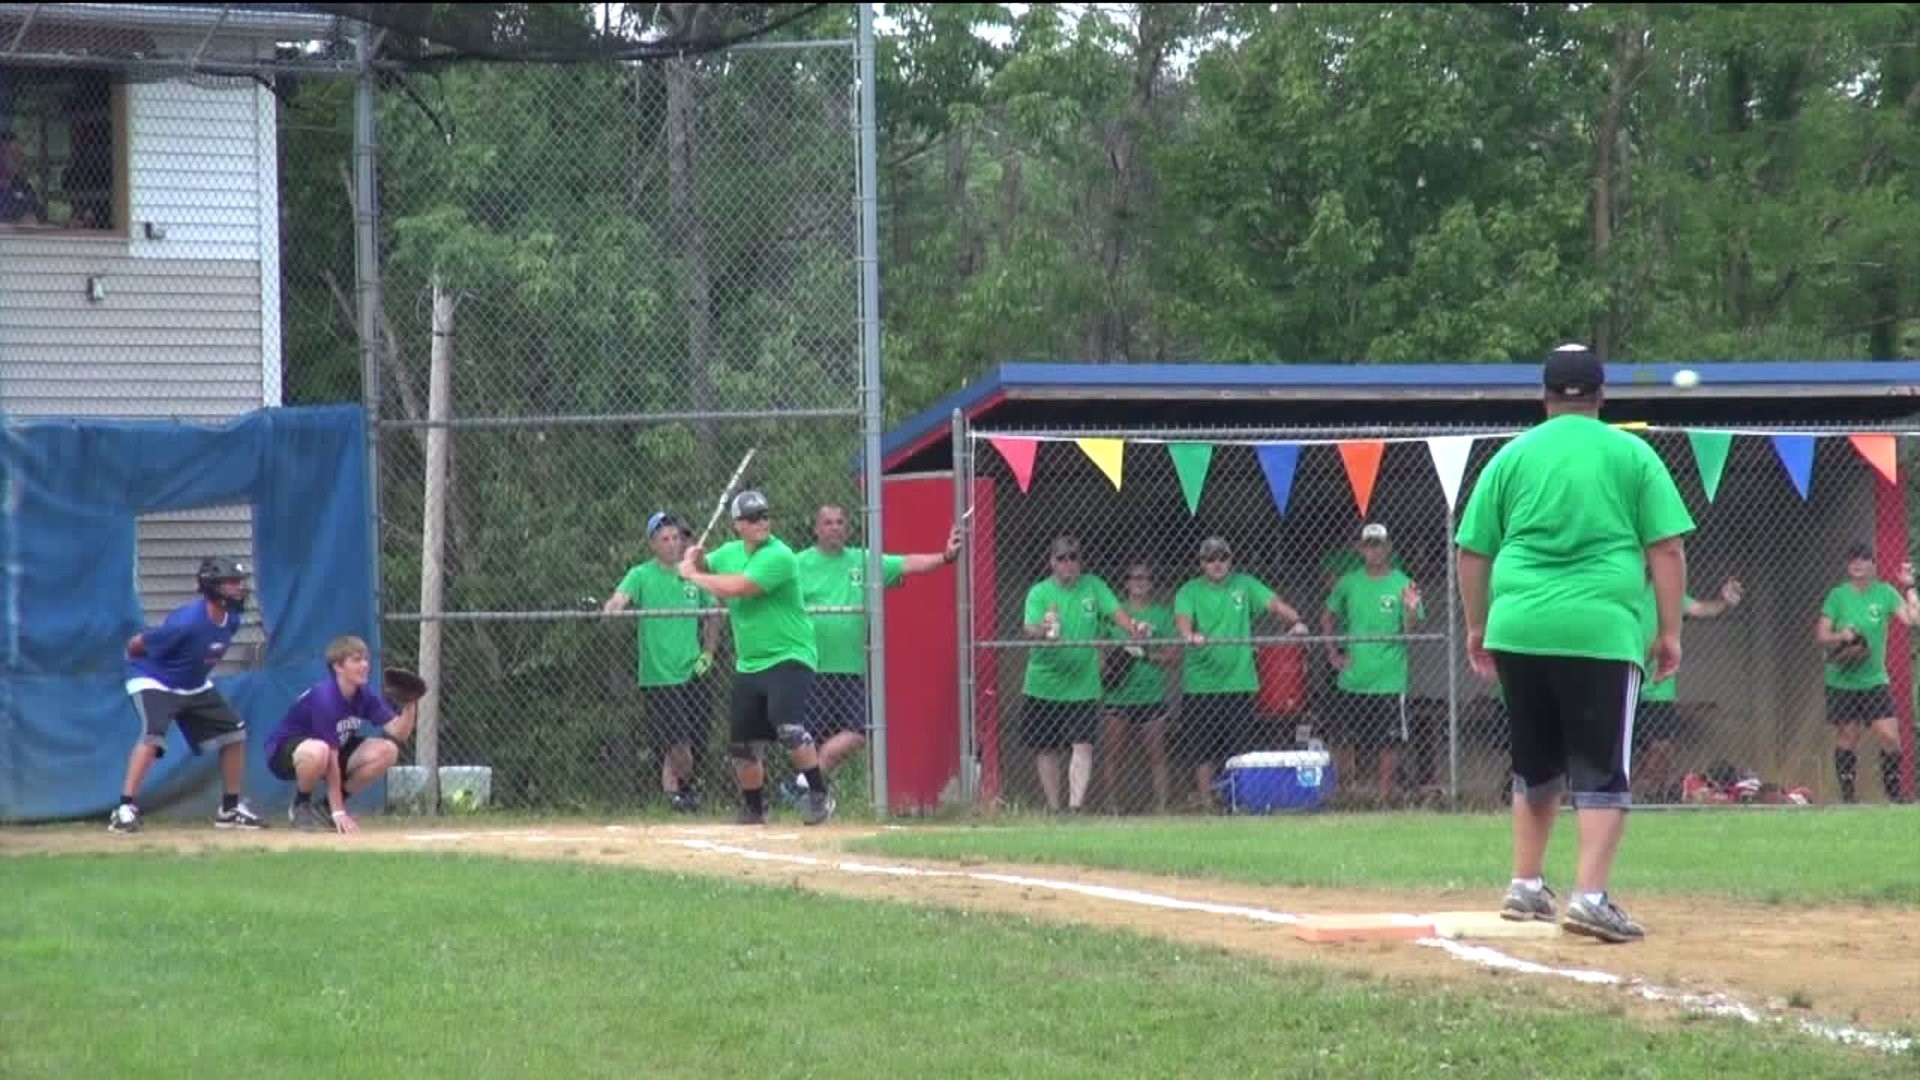 Troopers Take on Kids in Friendly Softball Game